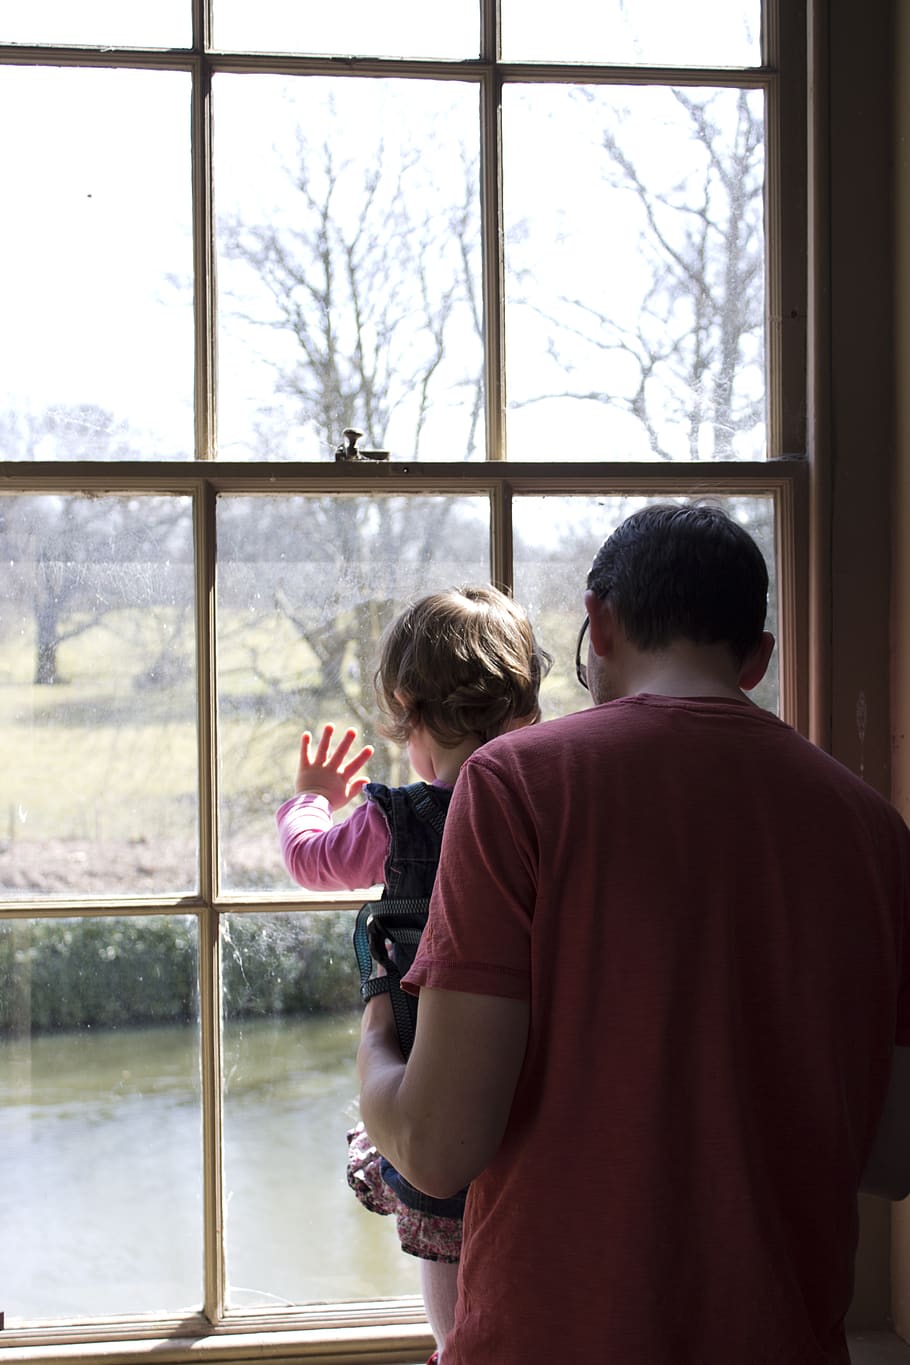 father, daughter, window, child, looking, architecture, interior, home, light, glass